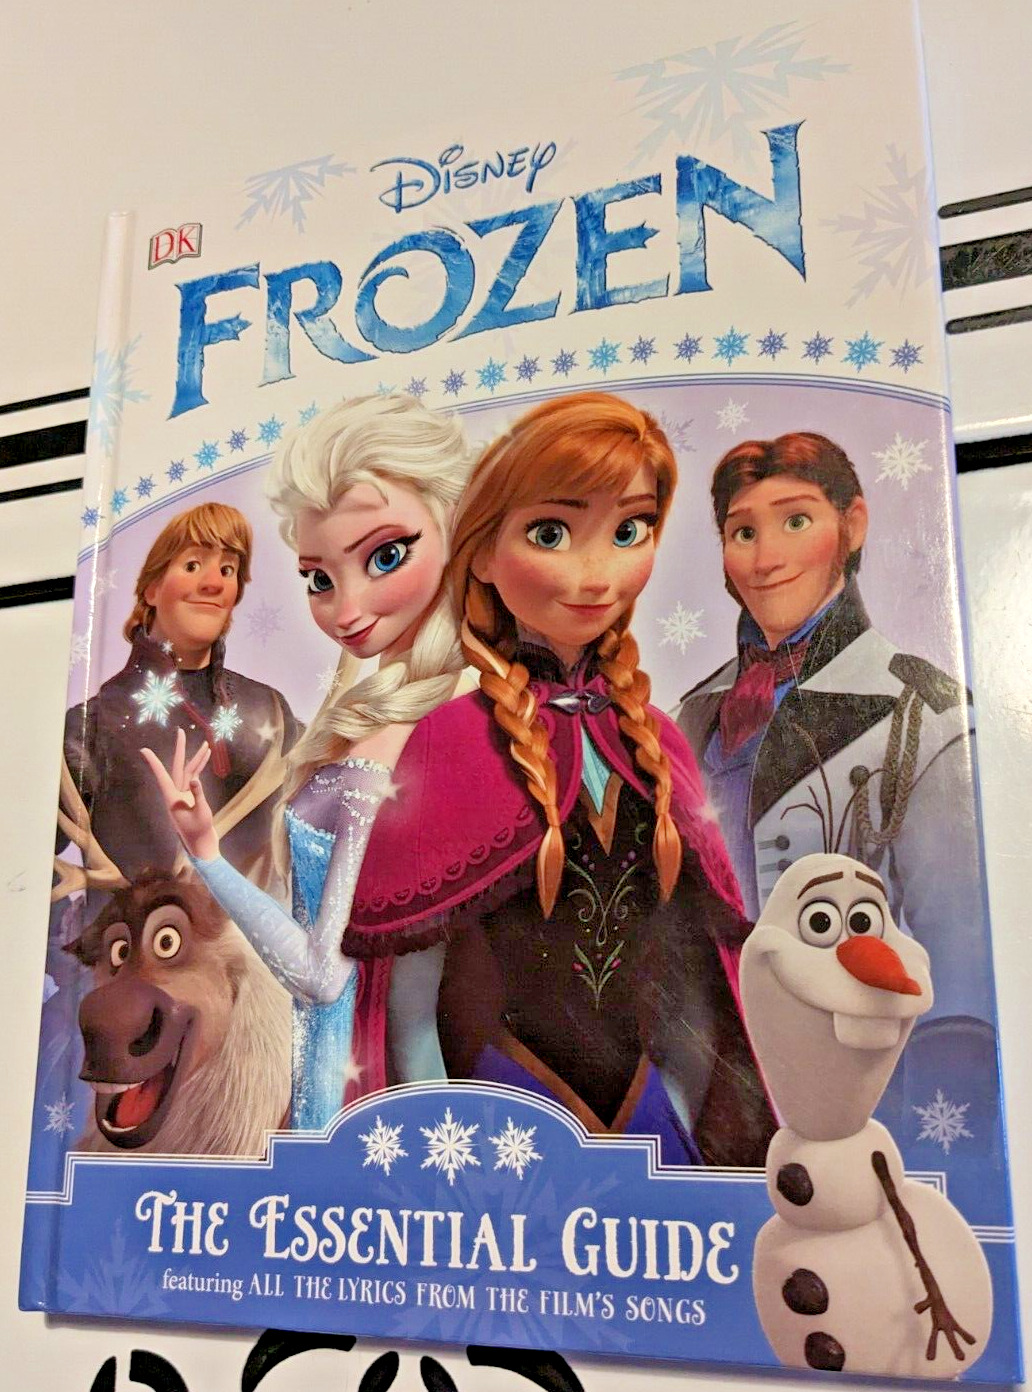 Disney Frozen the Essential Guide Hardcover, 1st Edition, 2014.